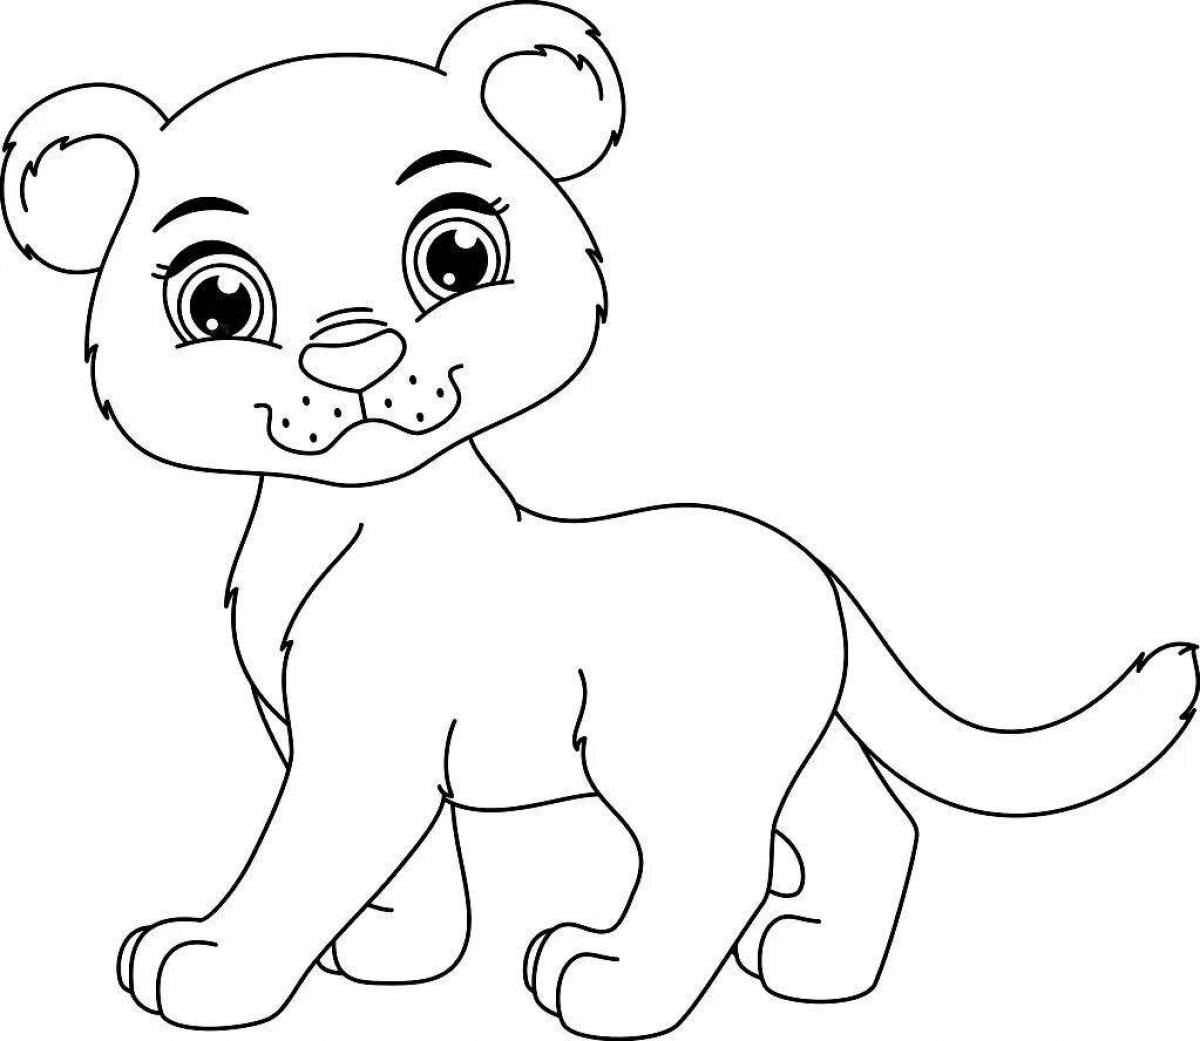 Majestic panther coloring book for kids